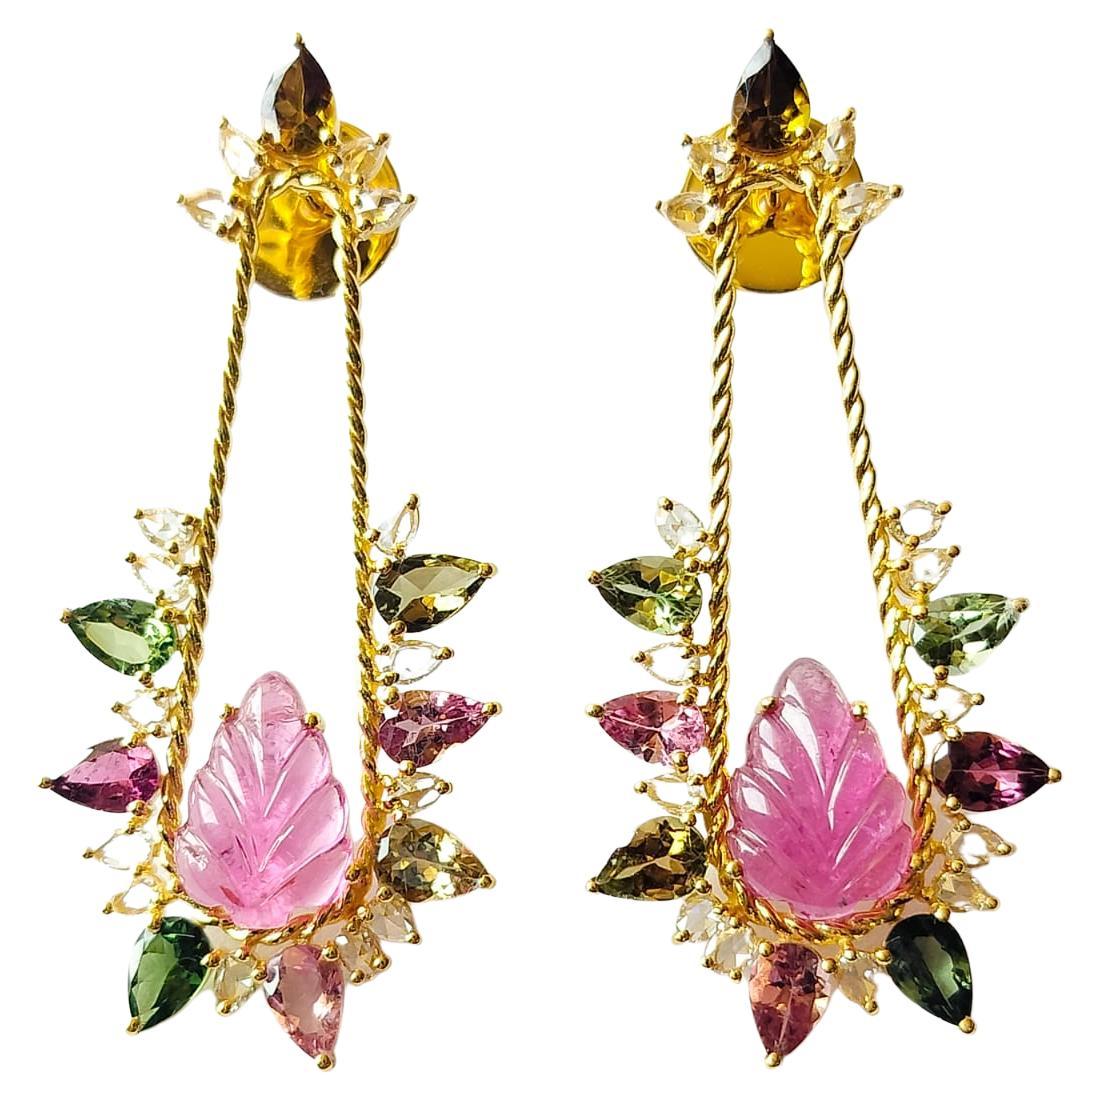 A very gorgeous and Art Deco style, Tourmaline and Multi Sapphire Chandelier / Dangle Earrings set in 18K Yellow Gold & Diamonds. The weight of the Tourmalines is 6.46 carats. The Tourmalines are hand carved in our very own workshop. The weight of